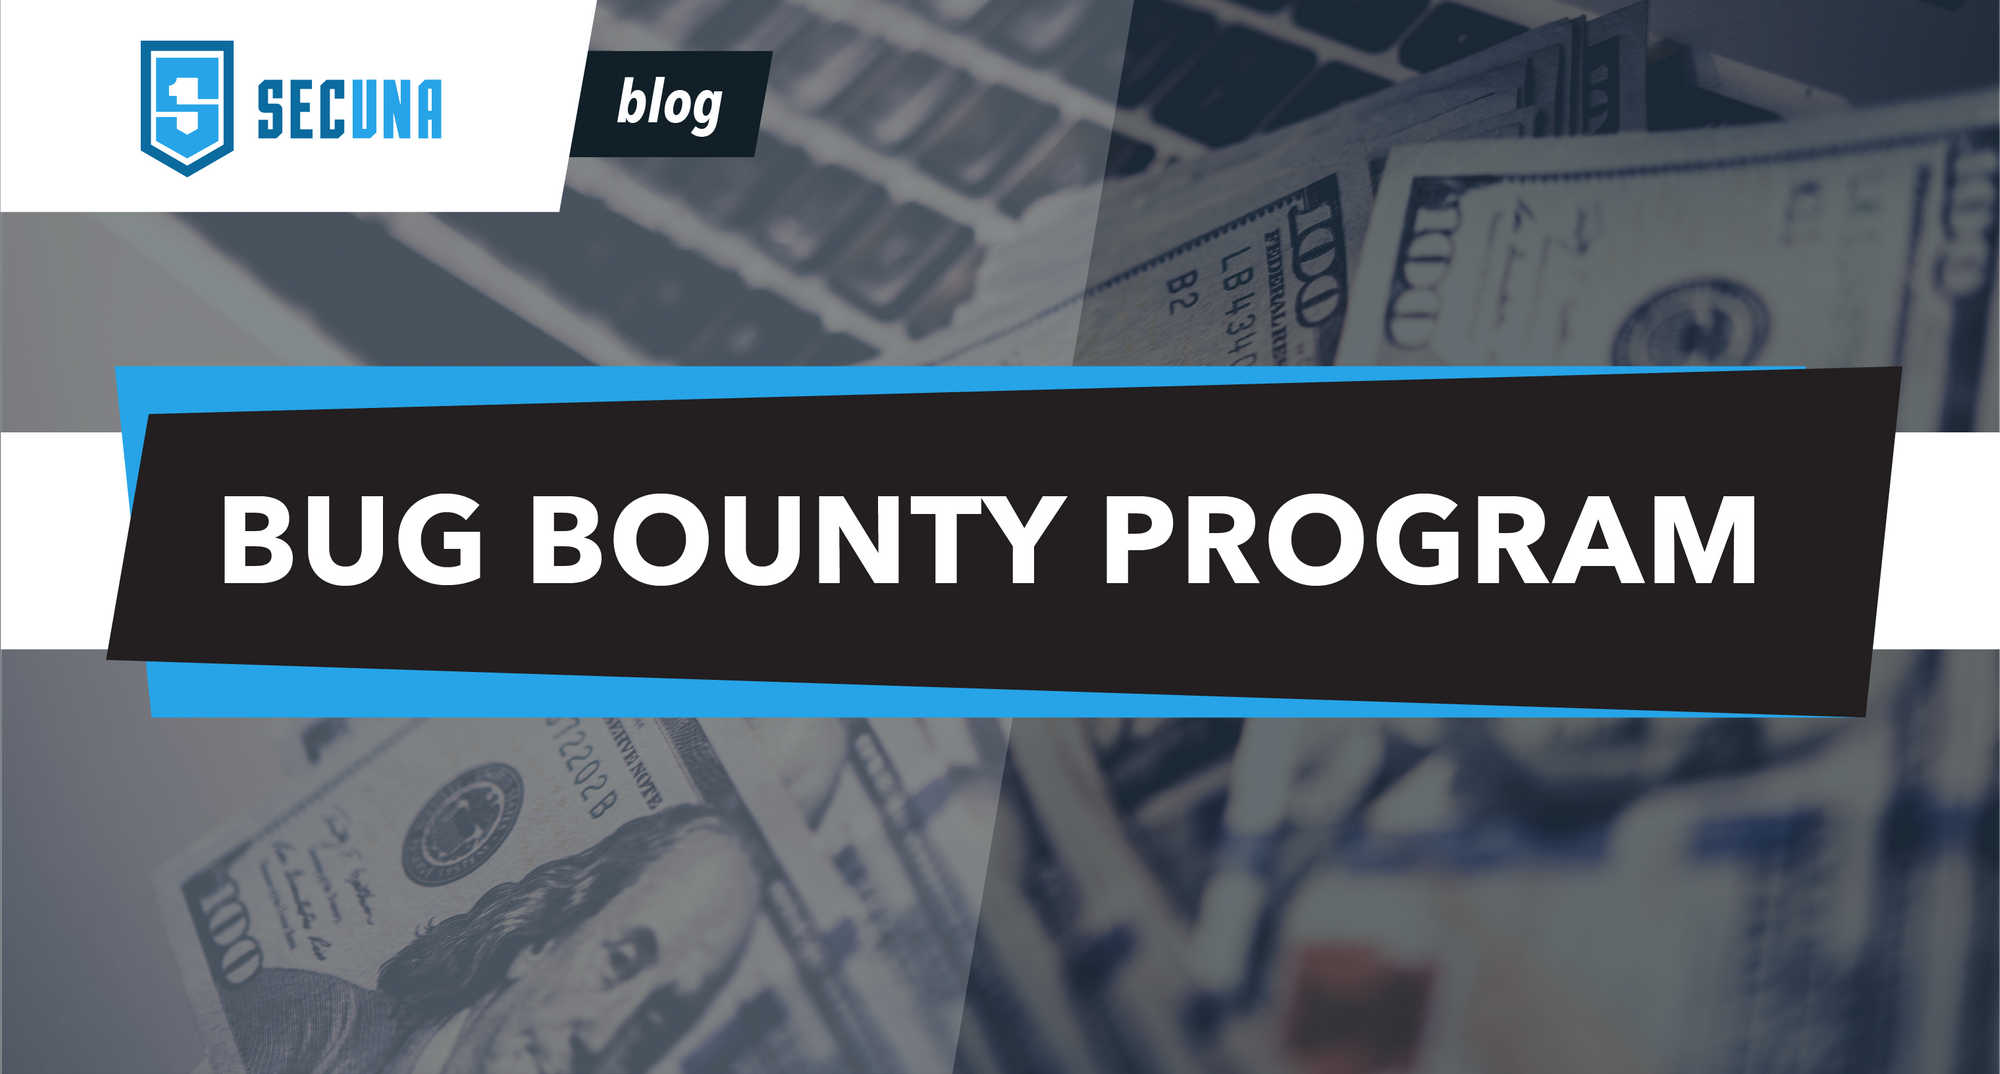 What is a Bug Bounty Program?